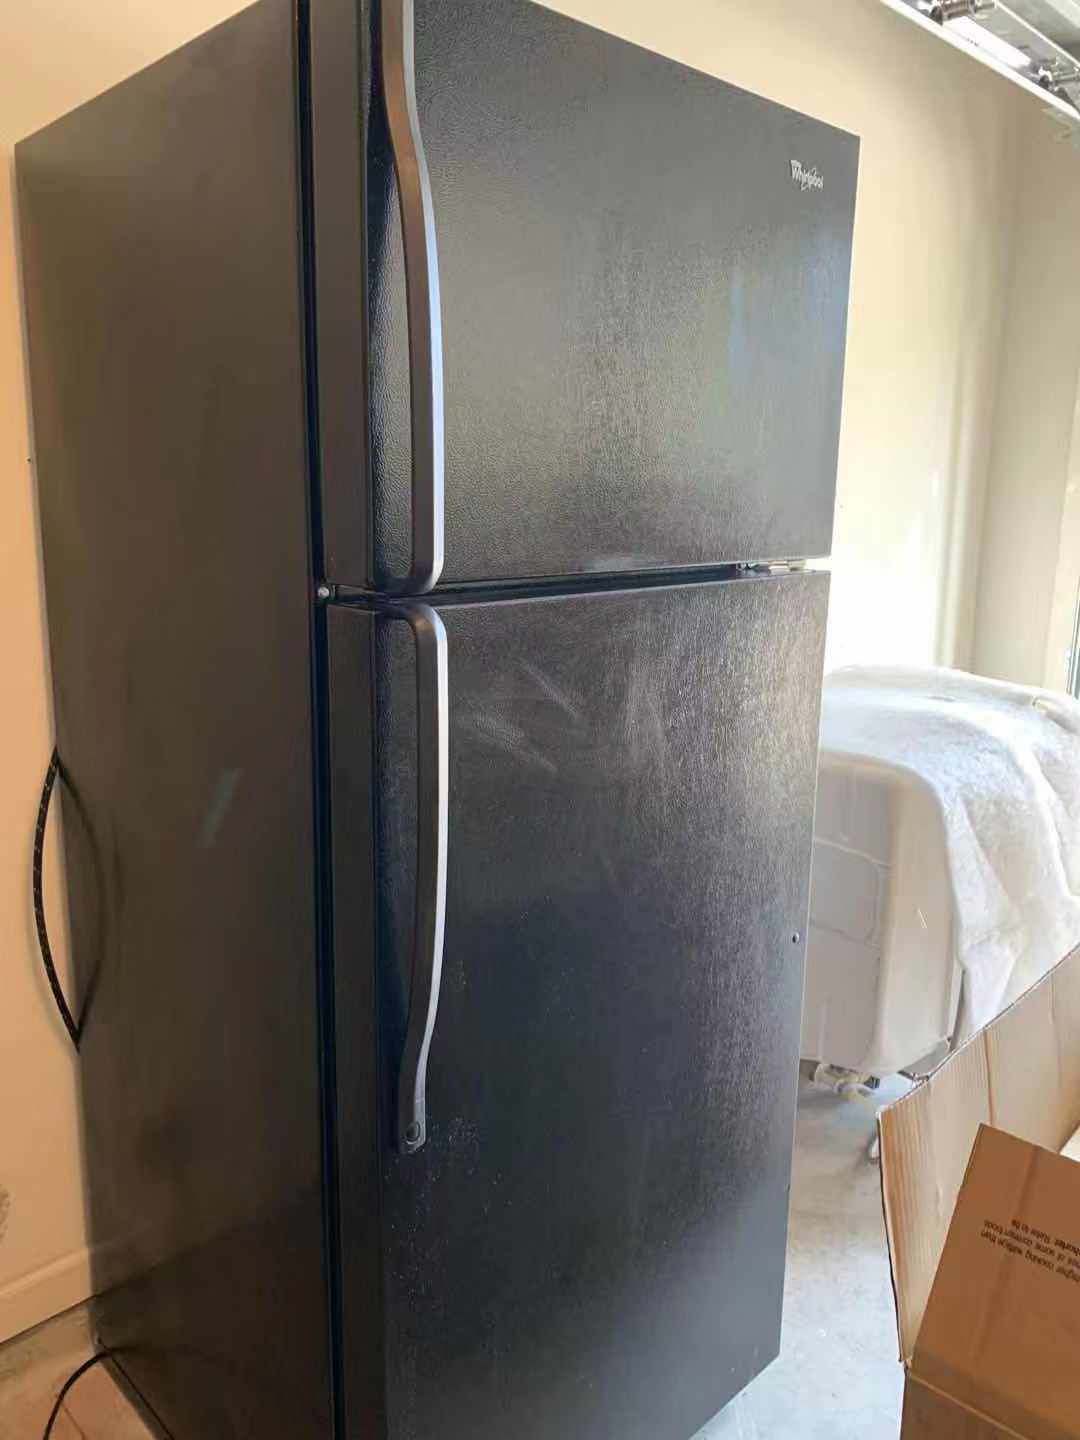 Whirlpool appliances! A set of Fridge, Oven, Dishwasher, and Microwave.. Please read below..